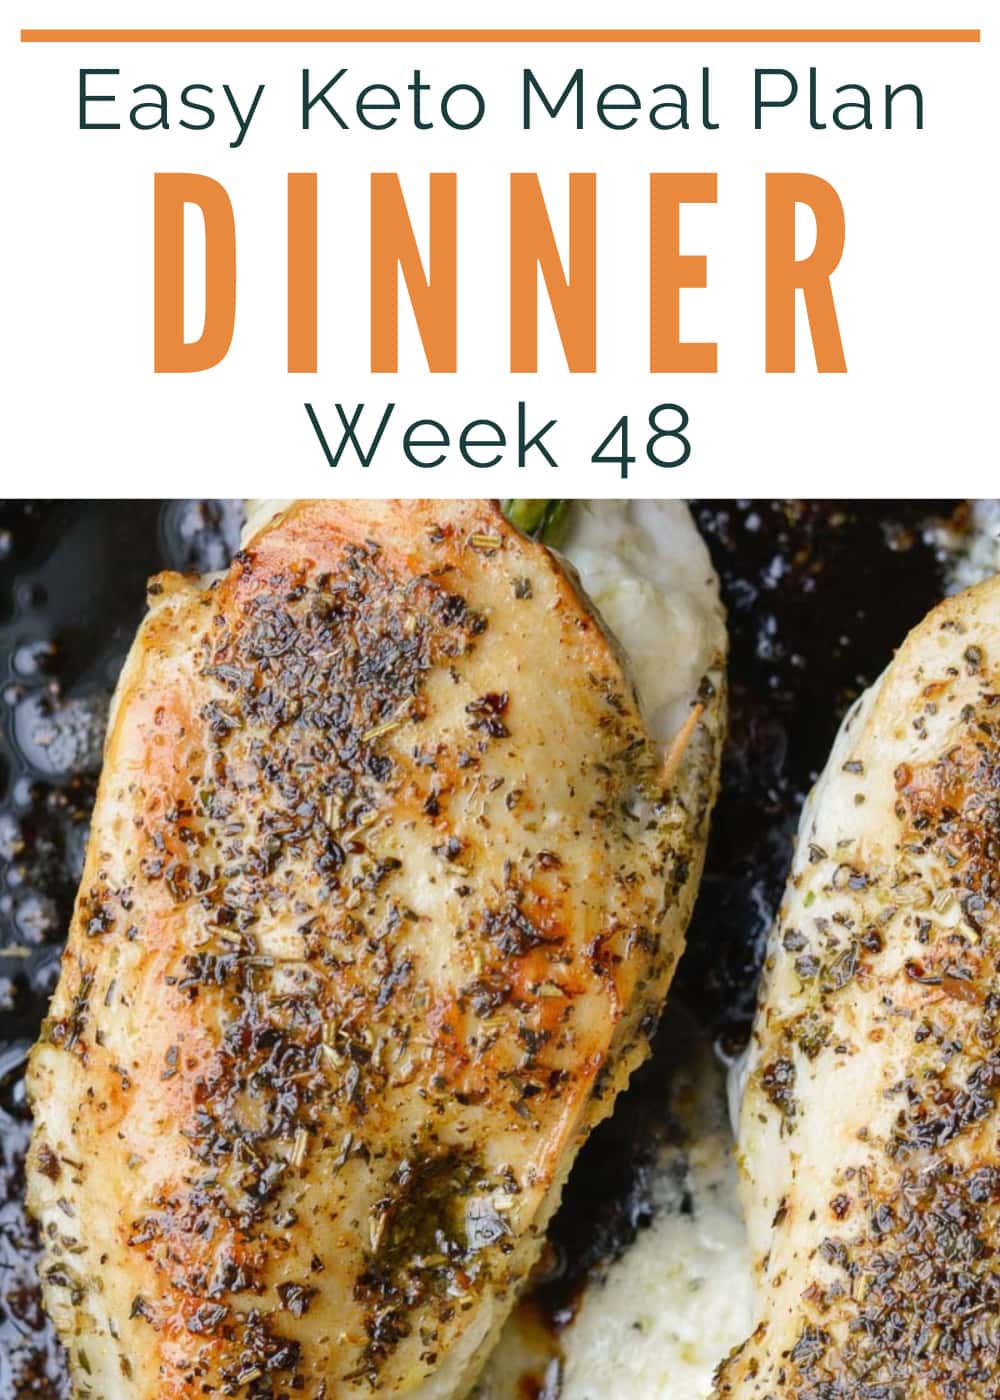 This Keto Meal Plan has super easy low carb dinners for weeknight meals! Included is a printable shopping list, meal prep tips, and two keto drink recipes!